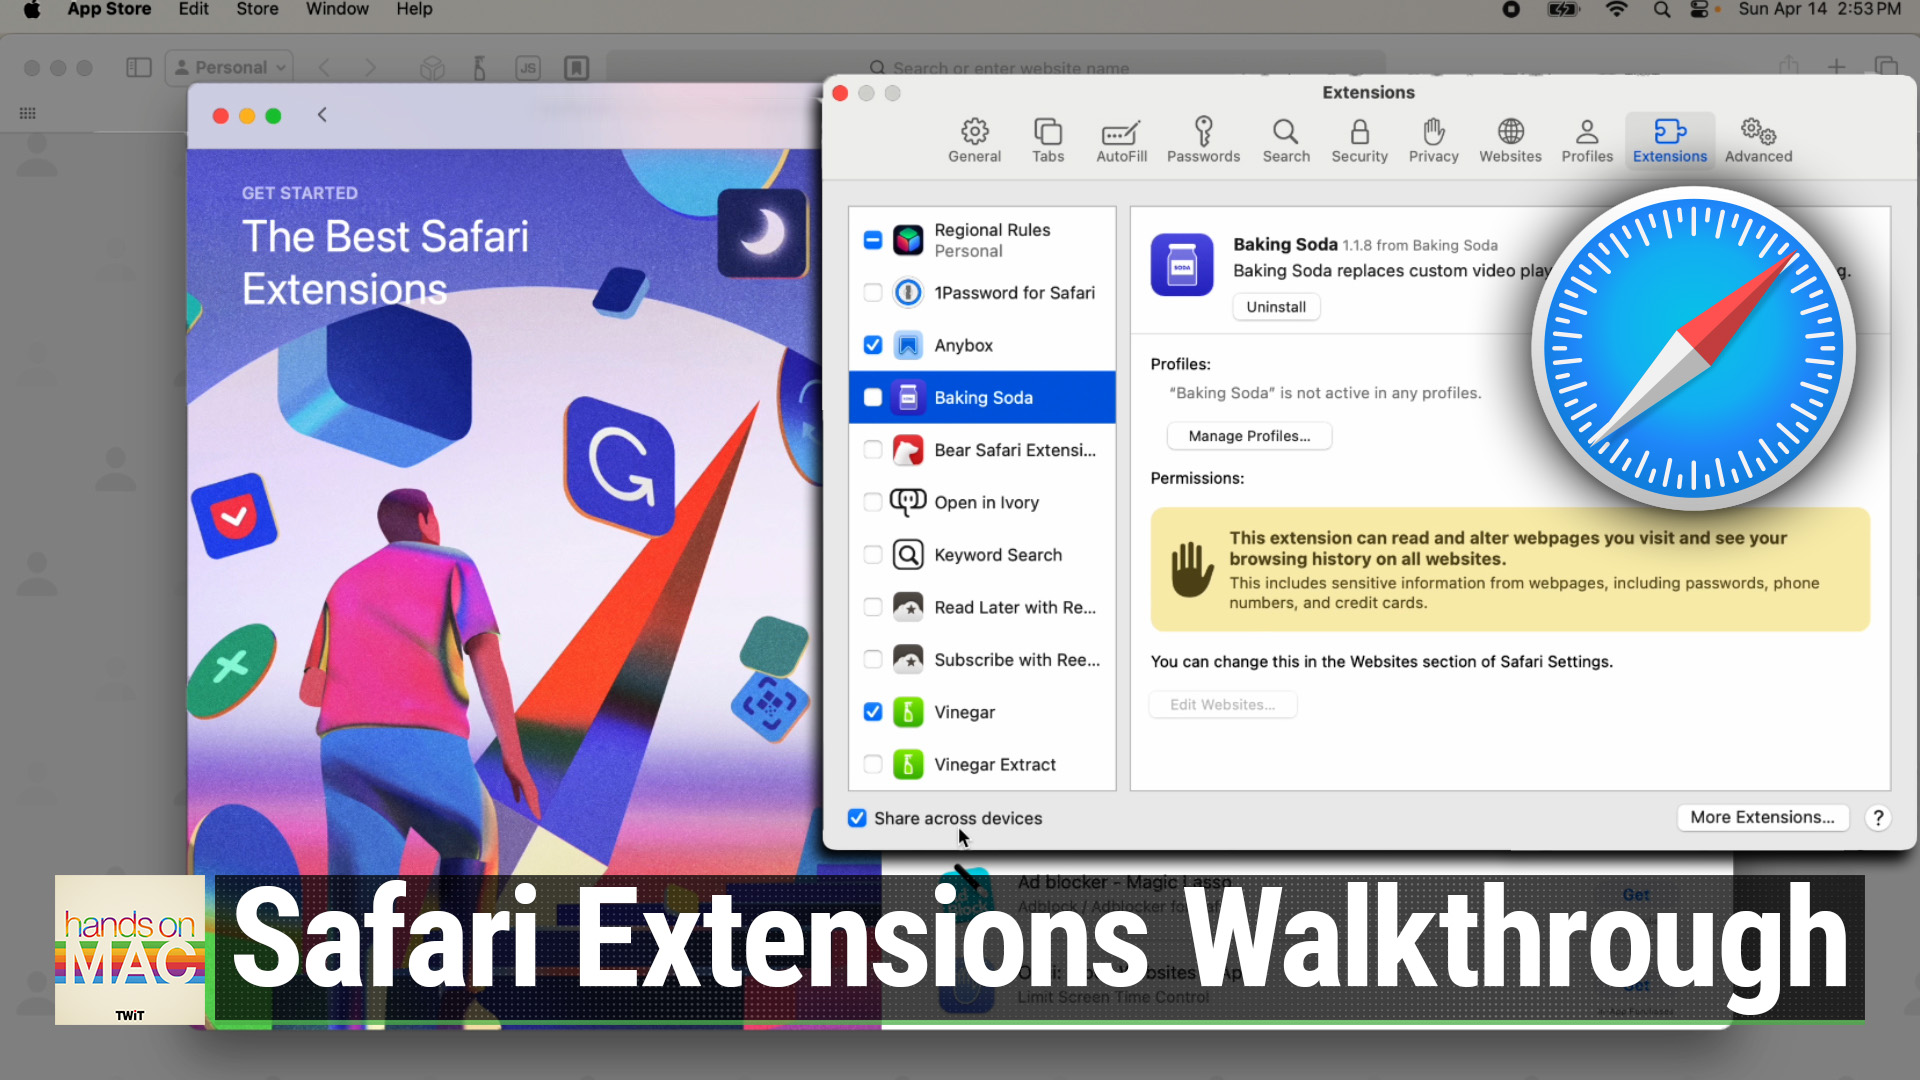 How To Use Safari Extensions (Hands-On Mac #129)